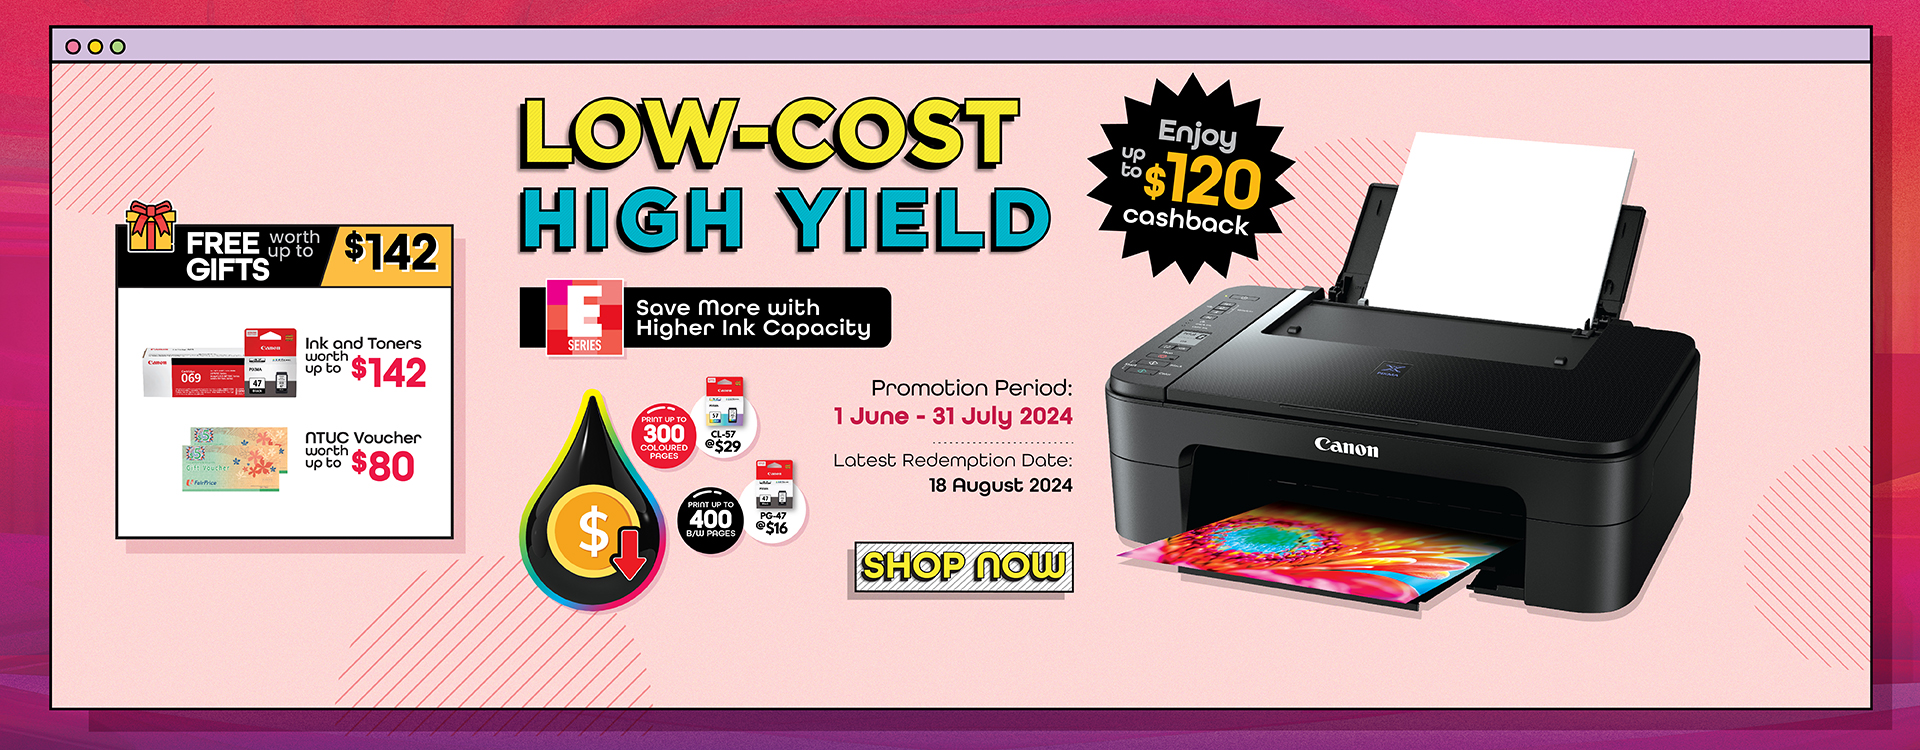 PSD June 2024 Promo - LOW COST HIGH YIELD